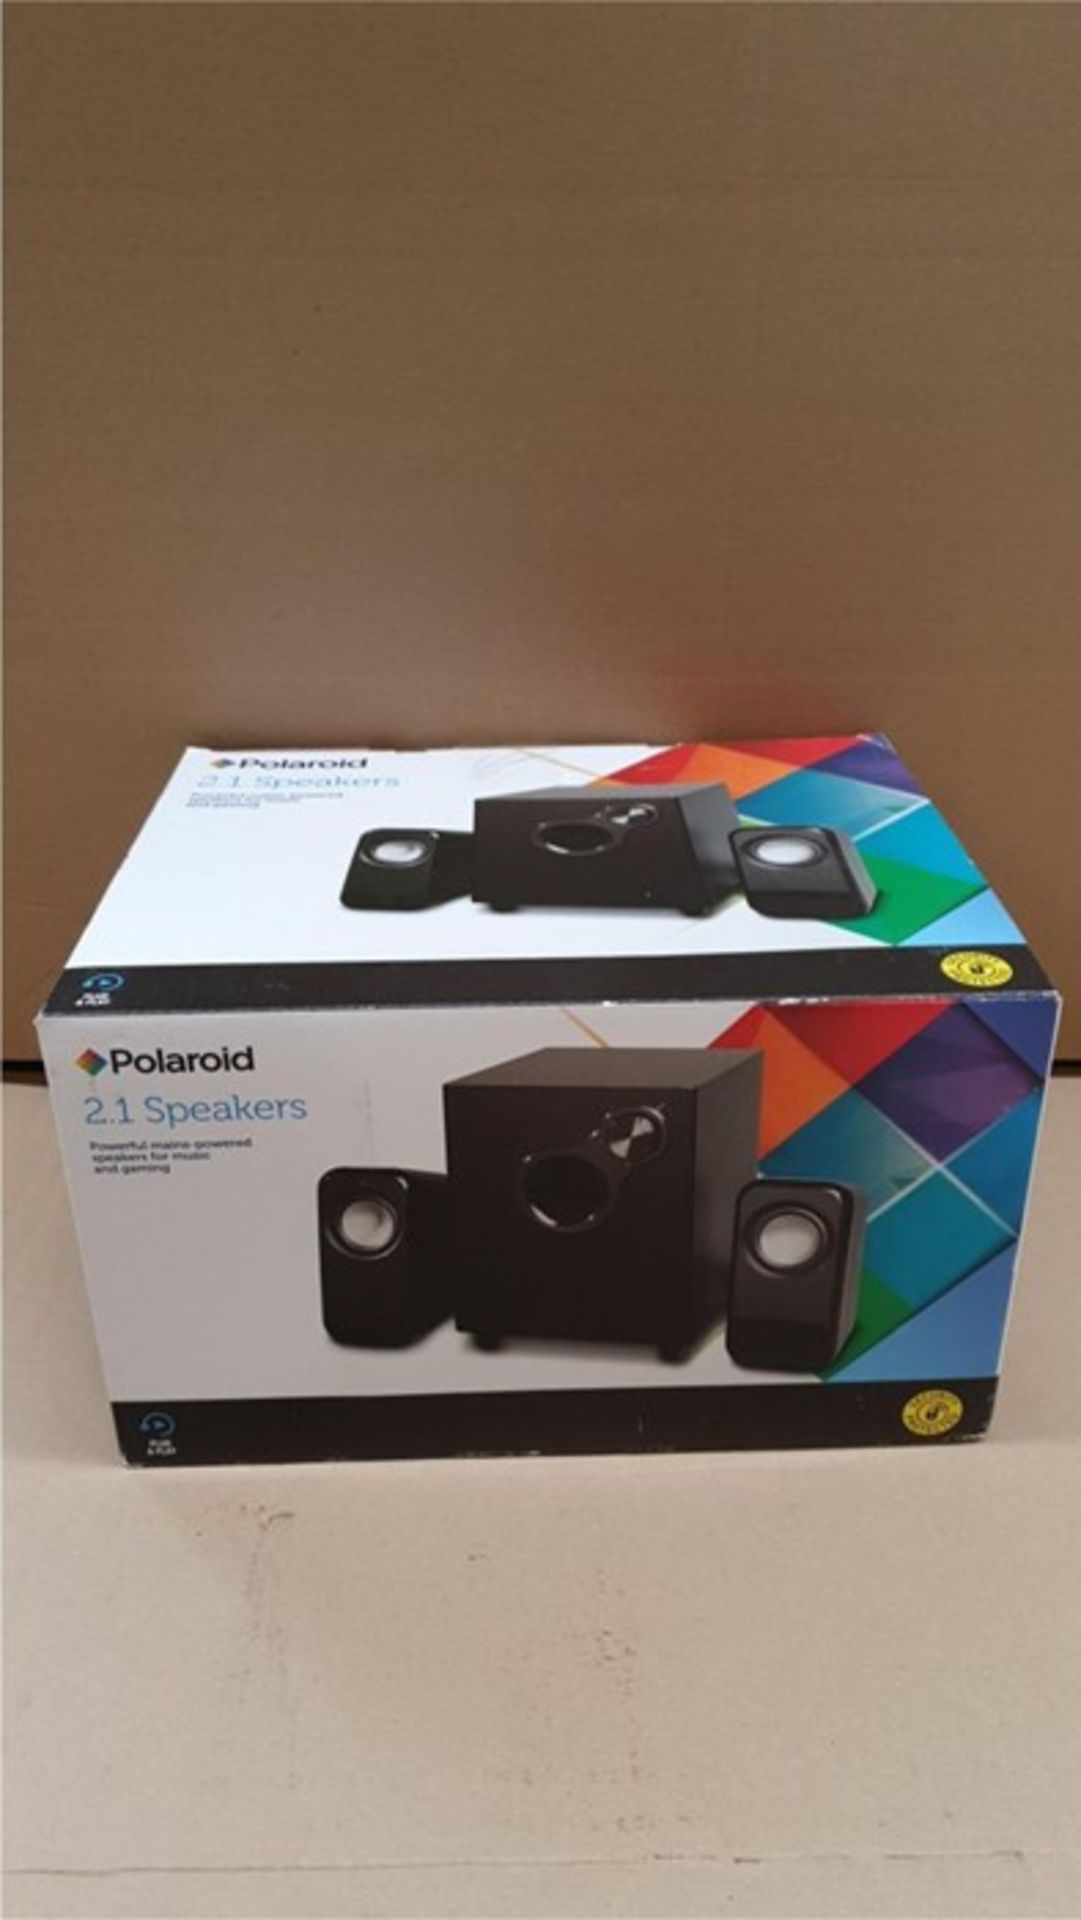 1 BOXED POLAROID 2.1 SPEAKERS / RRP £30.00 /BL - 5390 (VIEWING HIGHLY RECOMMENDED)